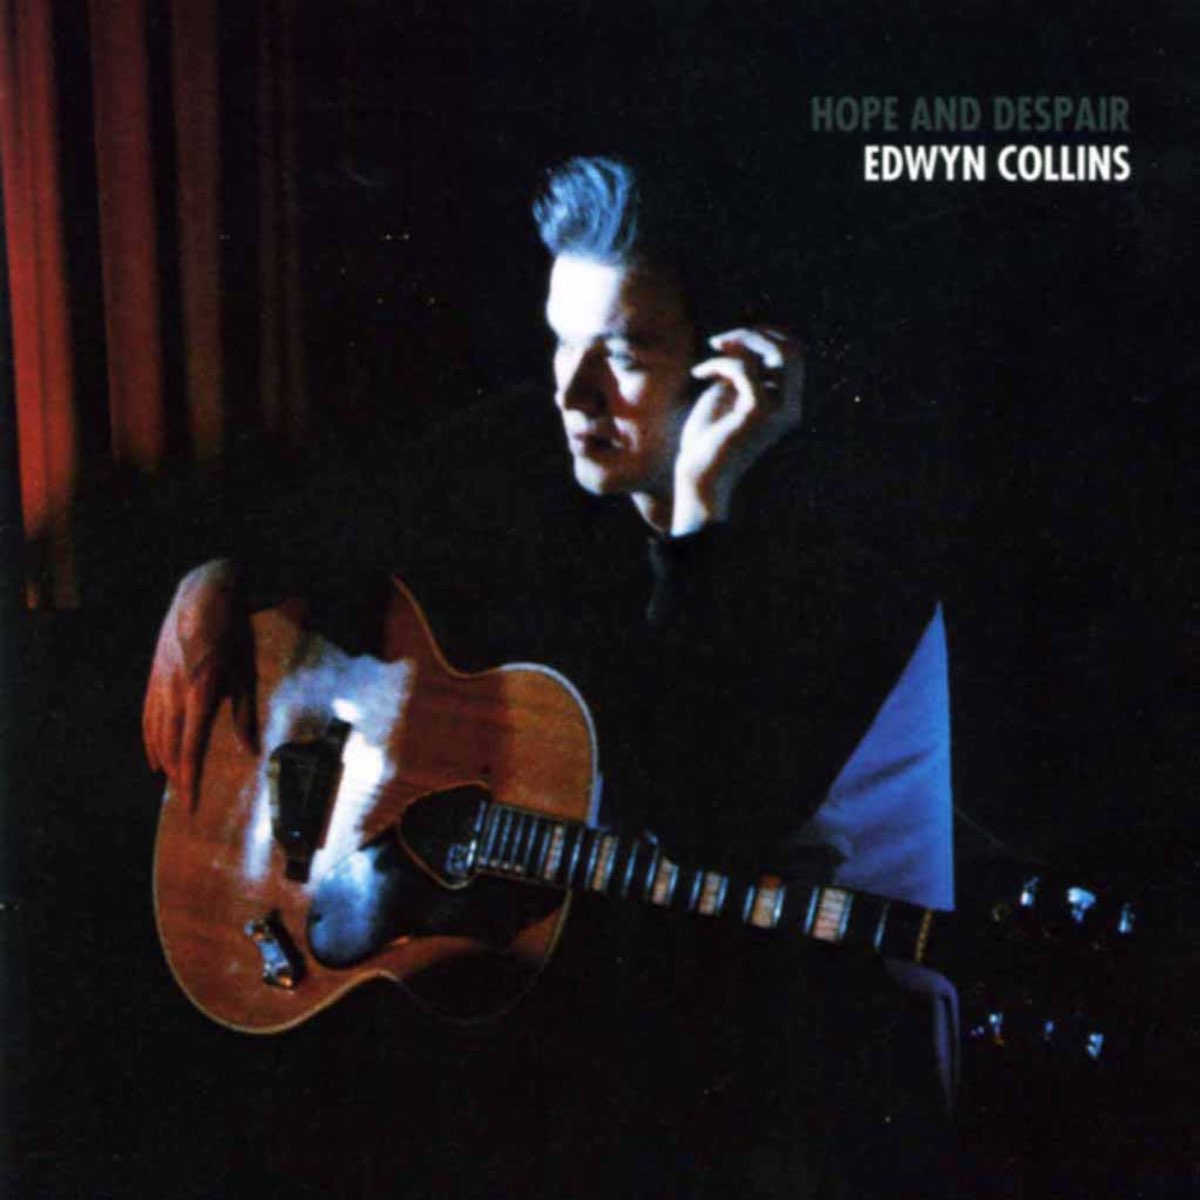 35 years ago today, @EdwynCollins released debut album “Hope And Despair.” Testing time.